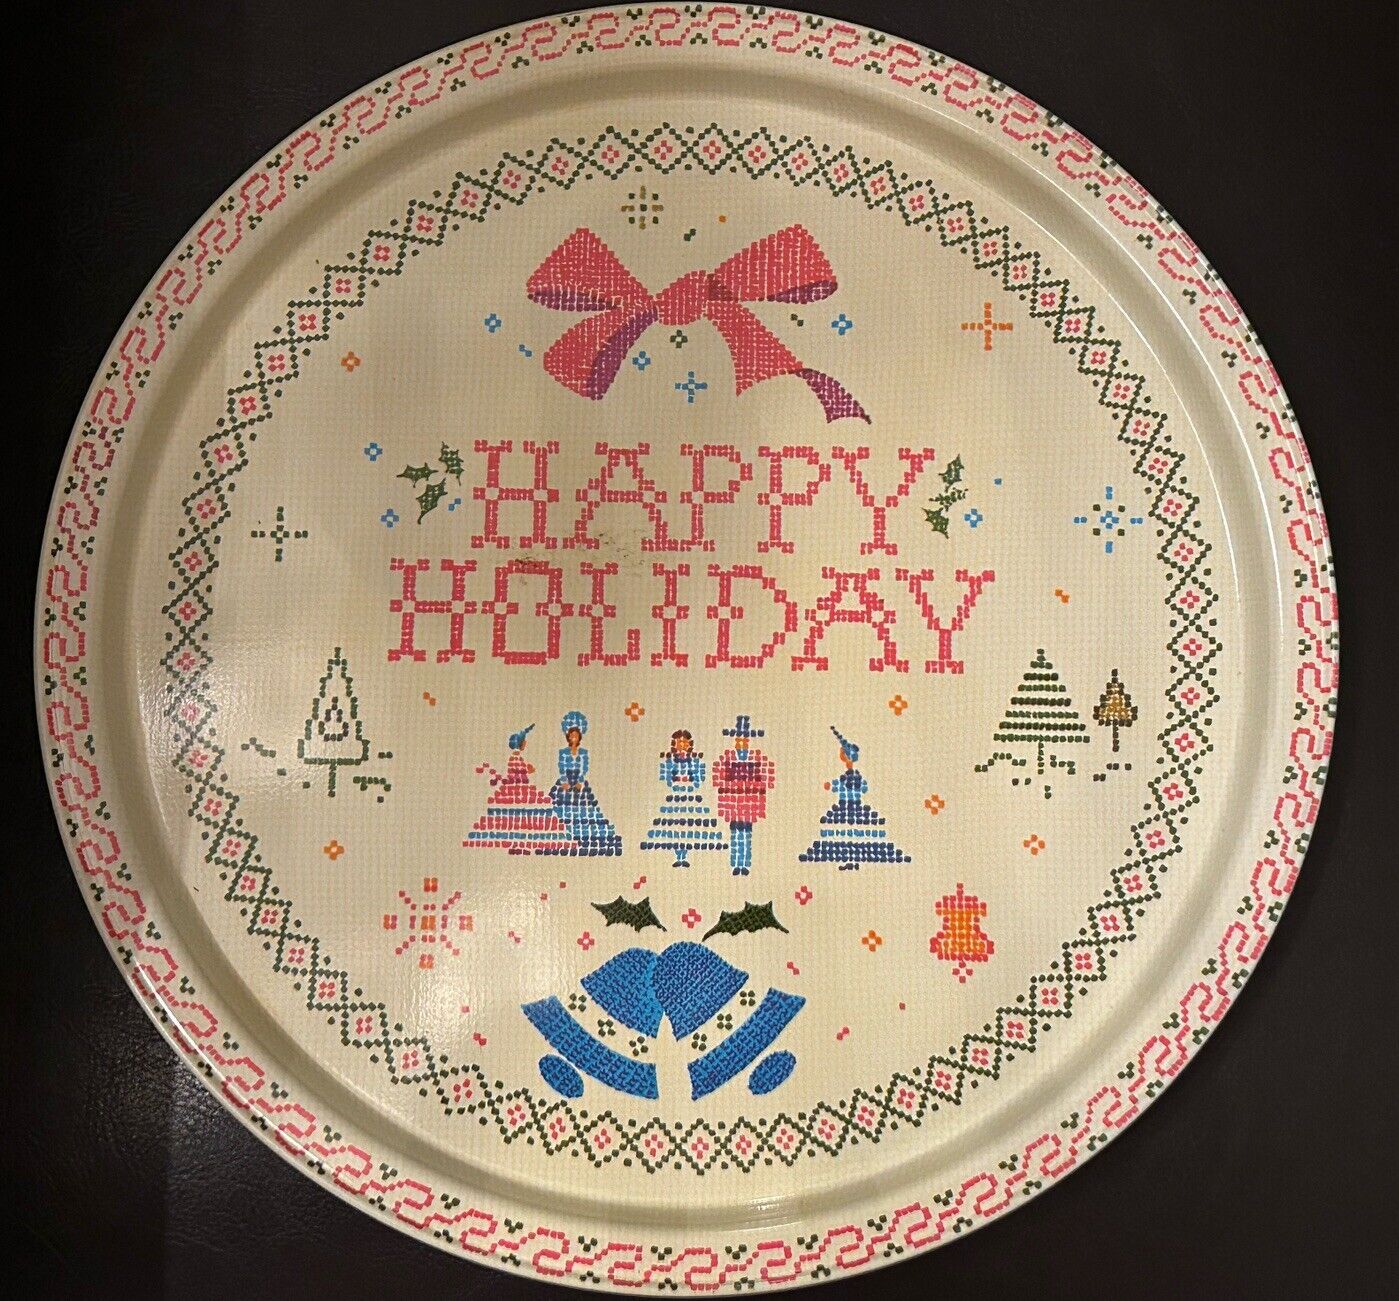 Lot 2 Vintage “Happy Holiday” Cookie Trays 10.75” Diameter